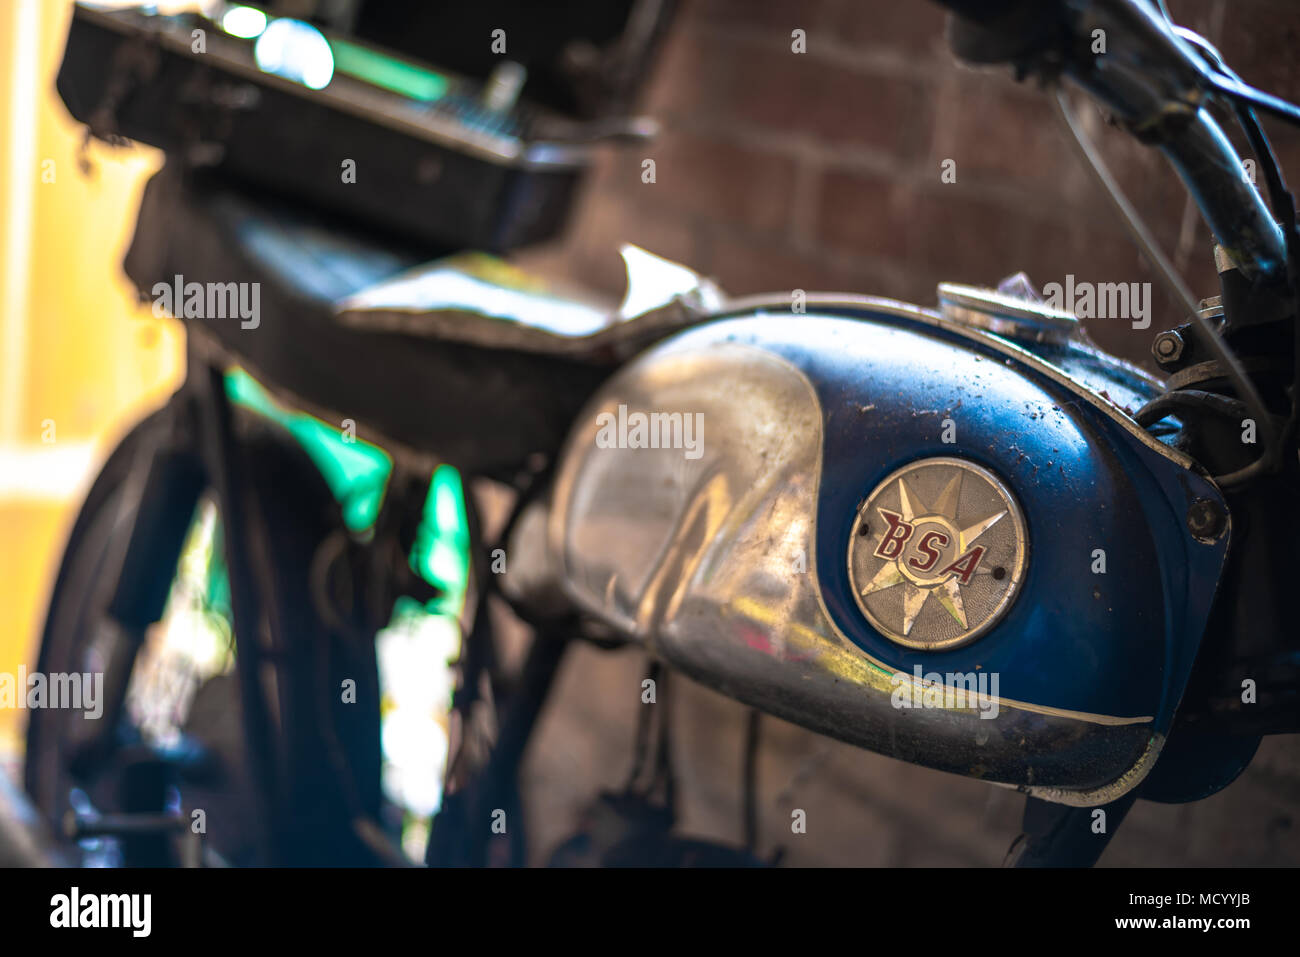 Old British bike in a shed. Stock Photo